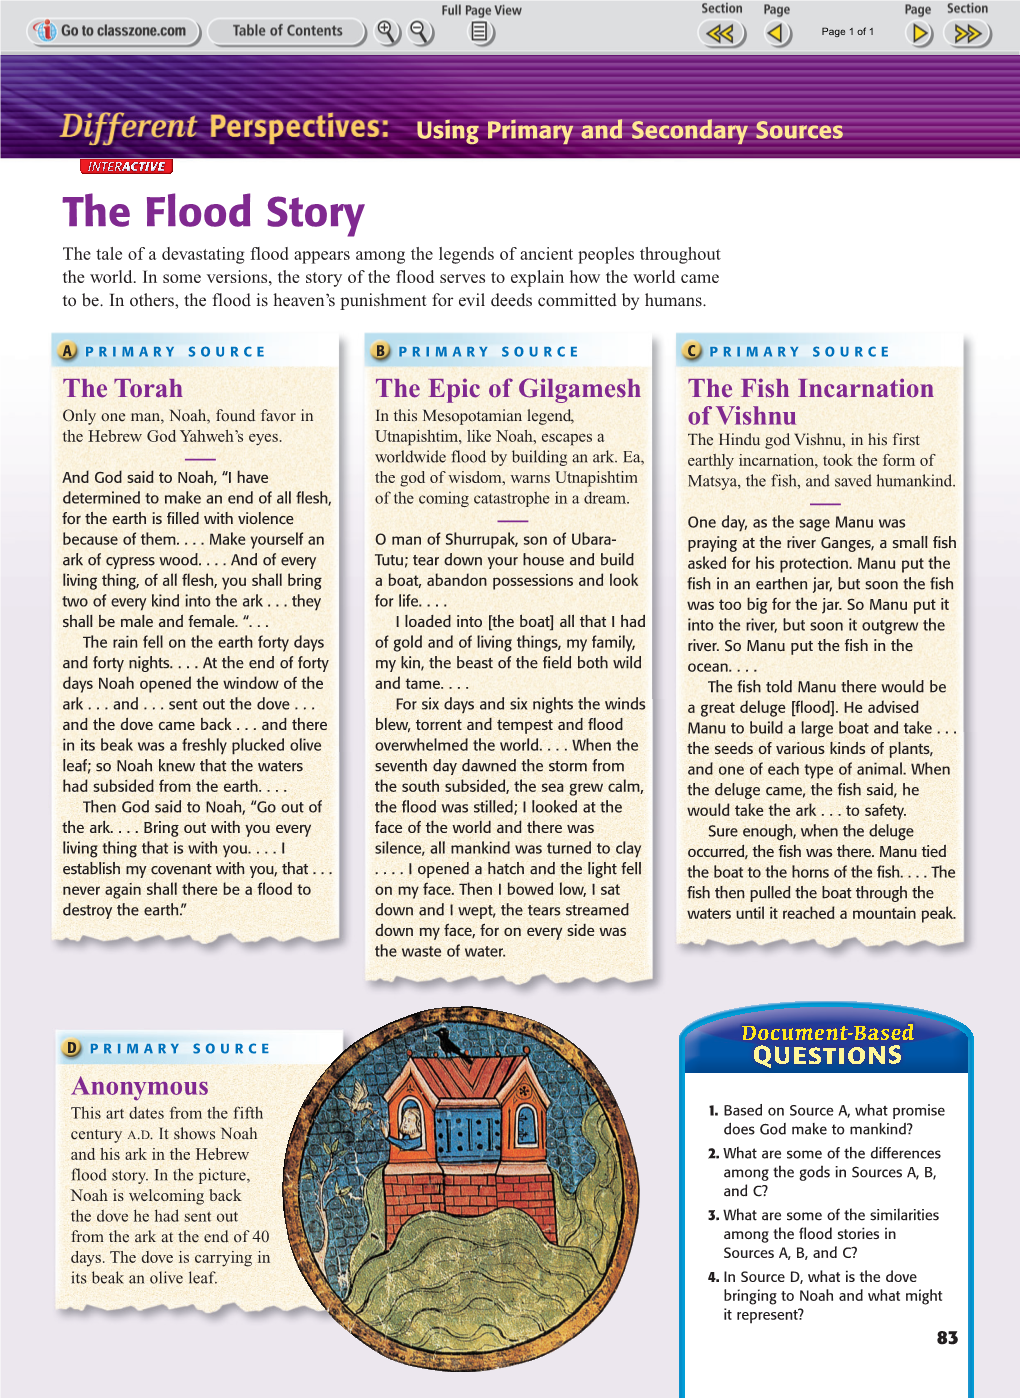 The Flood Story the Tale of a Devastating Flood Appears Among the Legends of Ancient Peoples Throughout the World